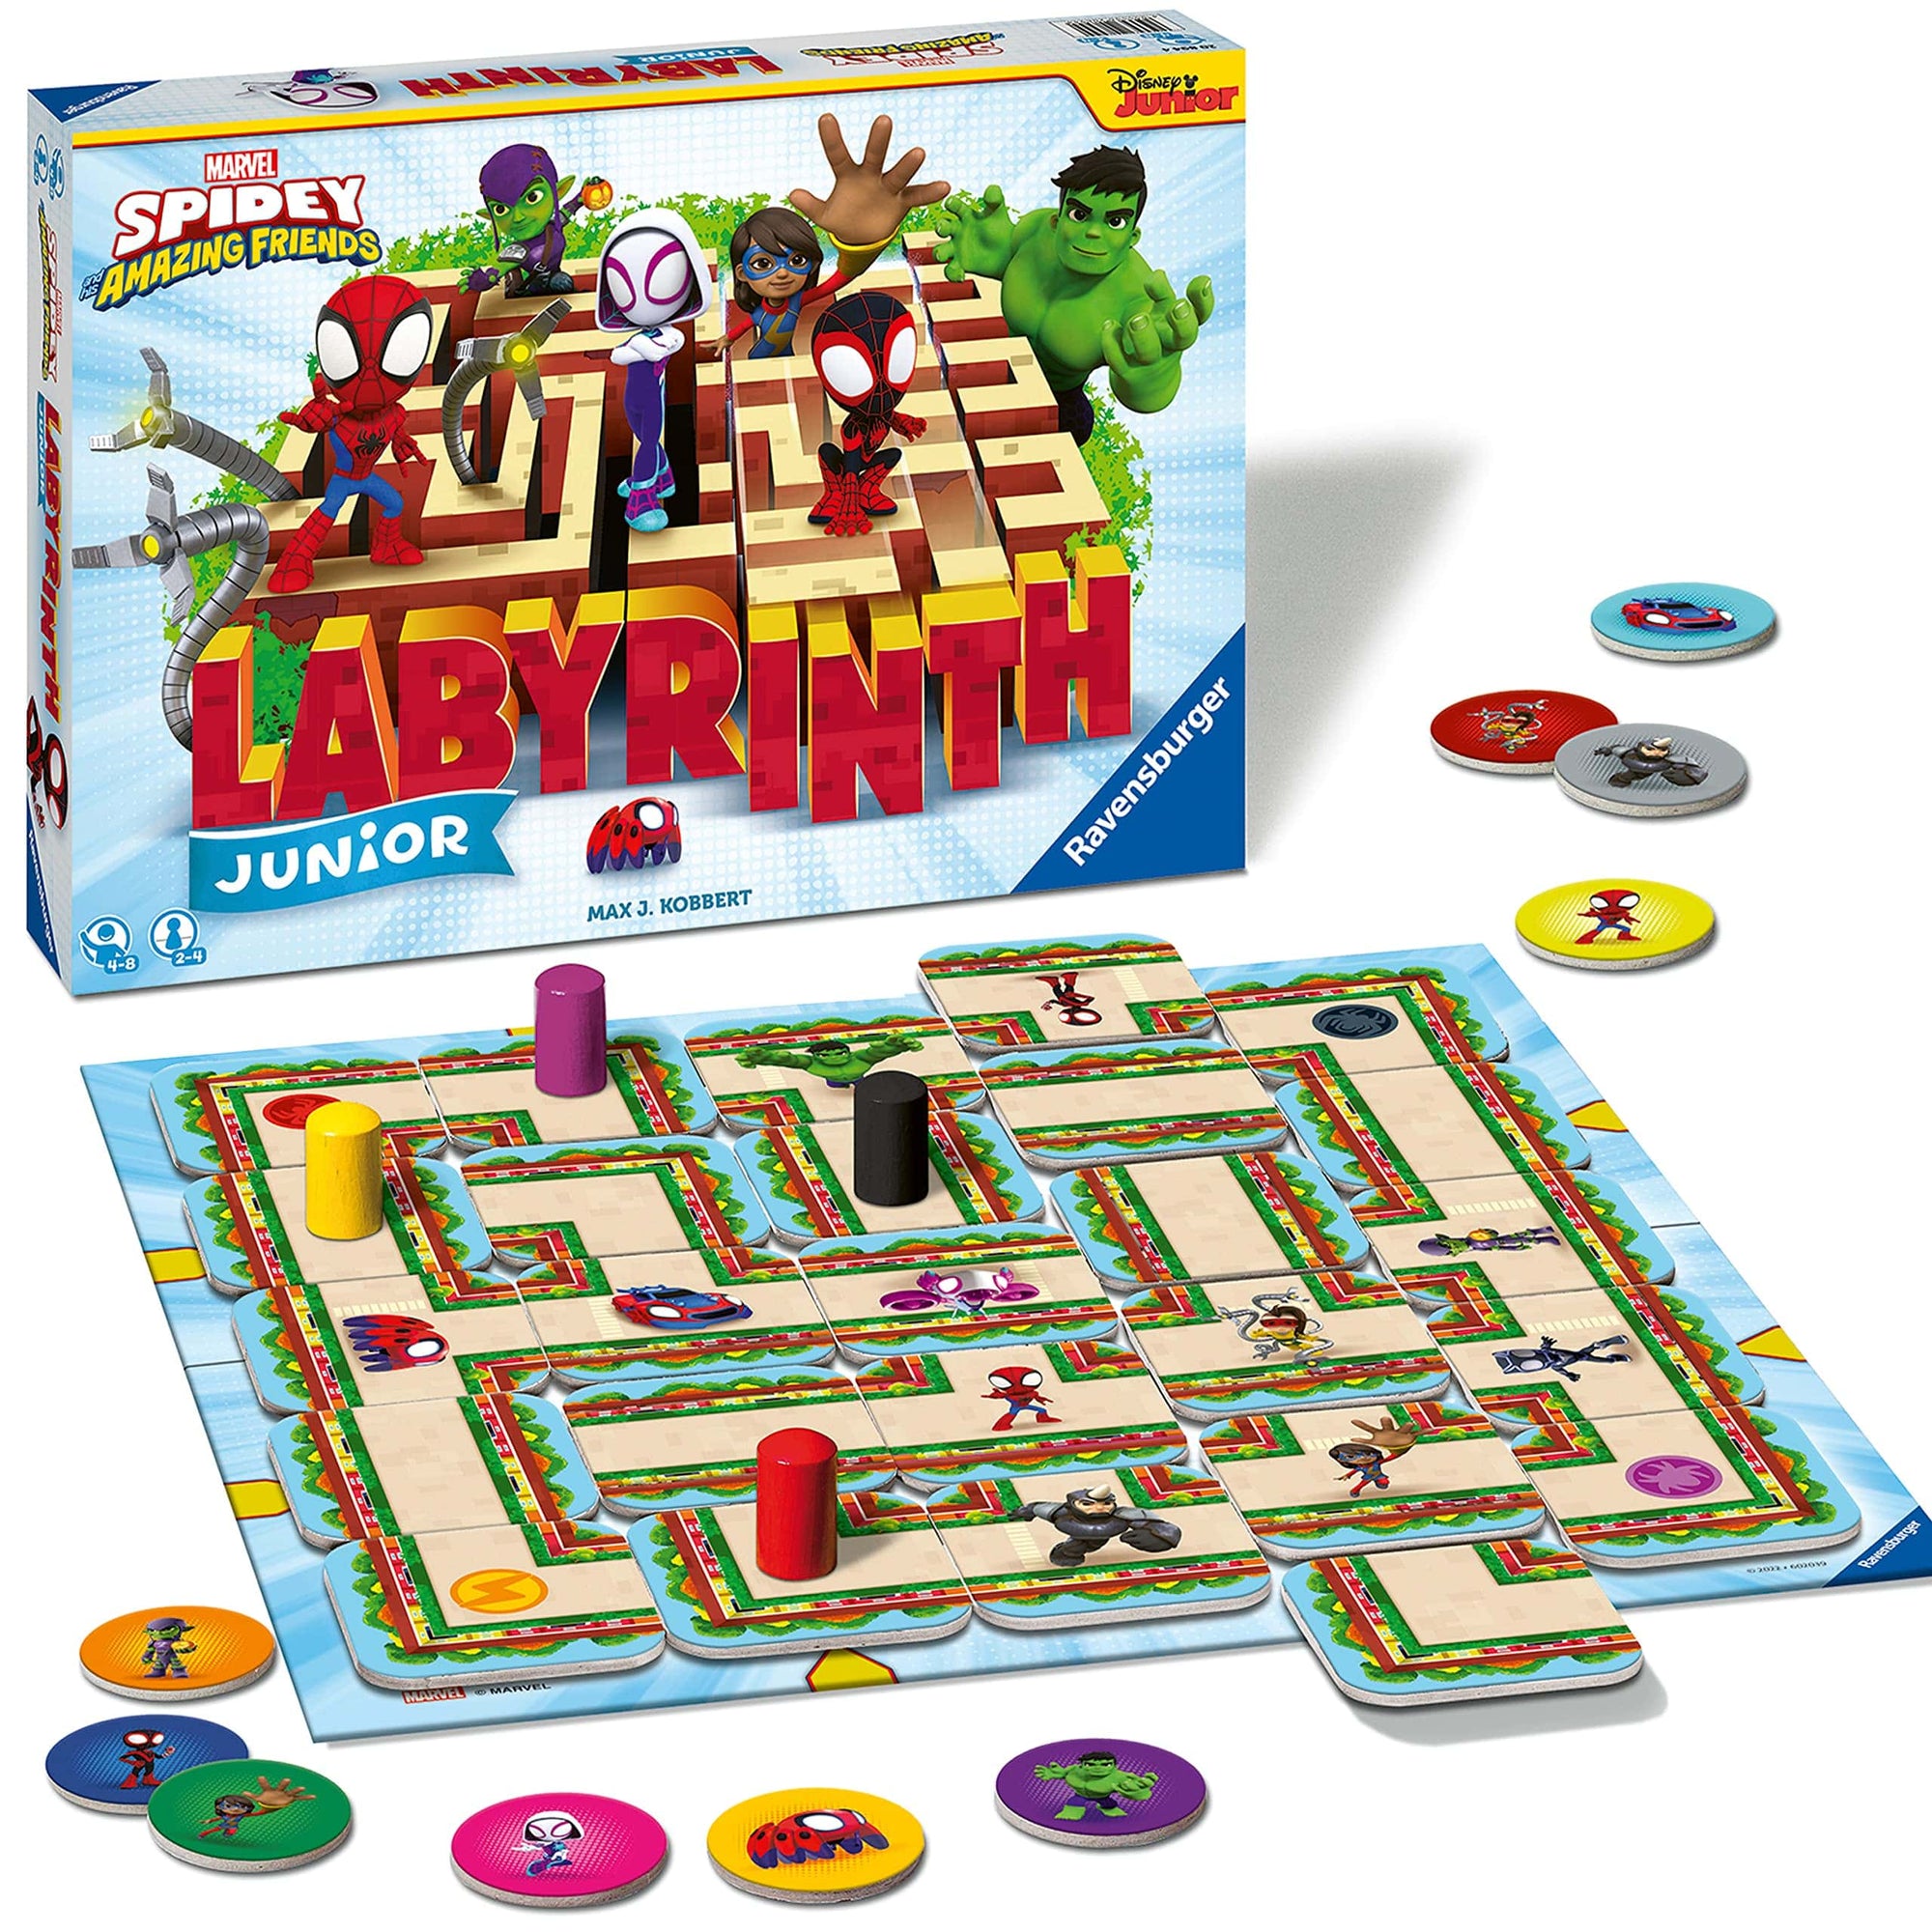 Ravensburger Board Games Ravensburger Spidey and His Amazing Friends Labyrinth Jr.